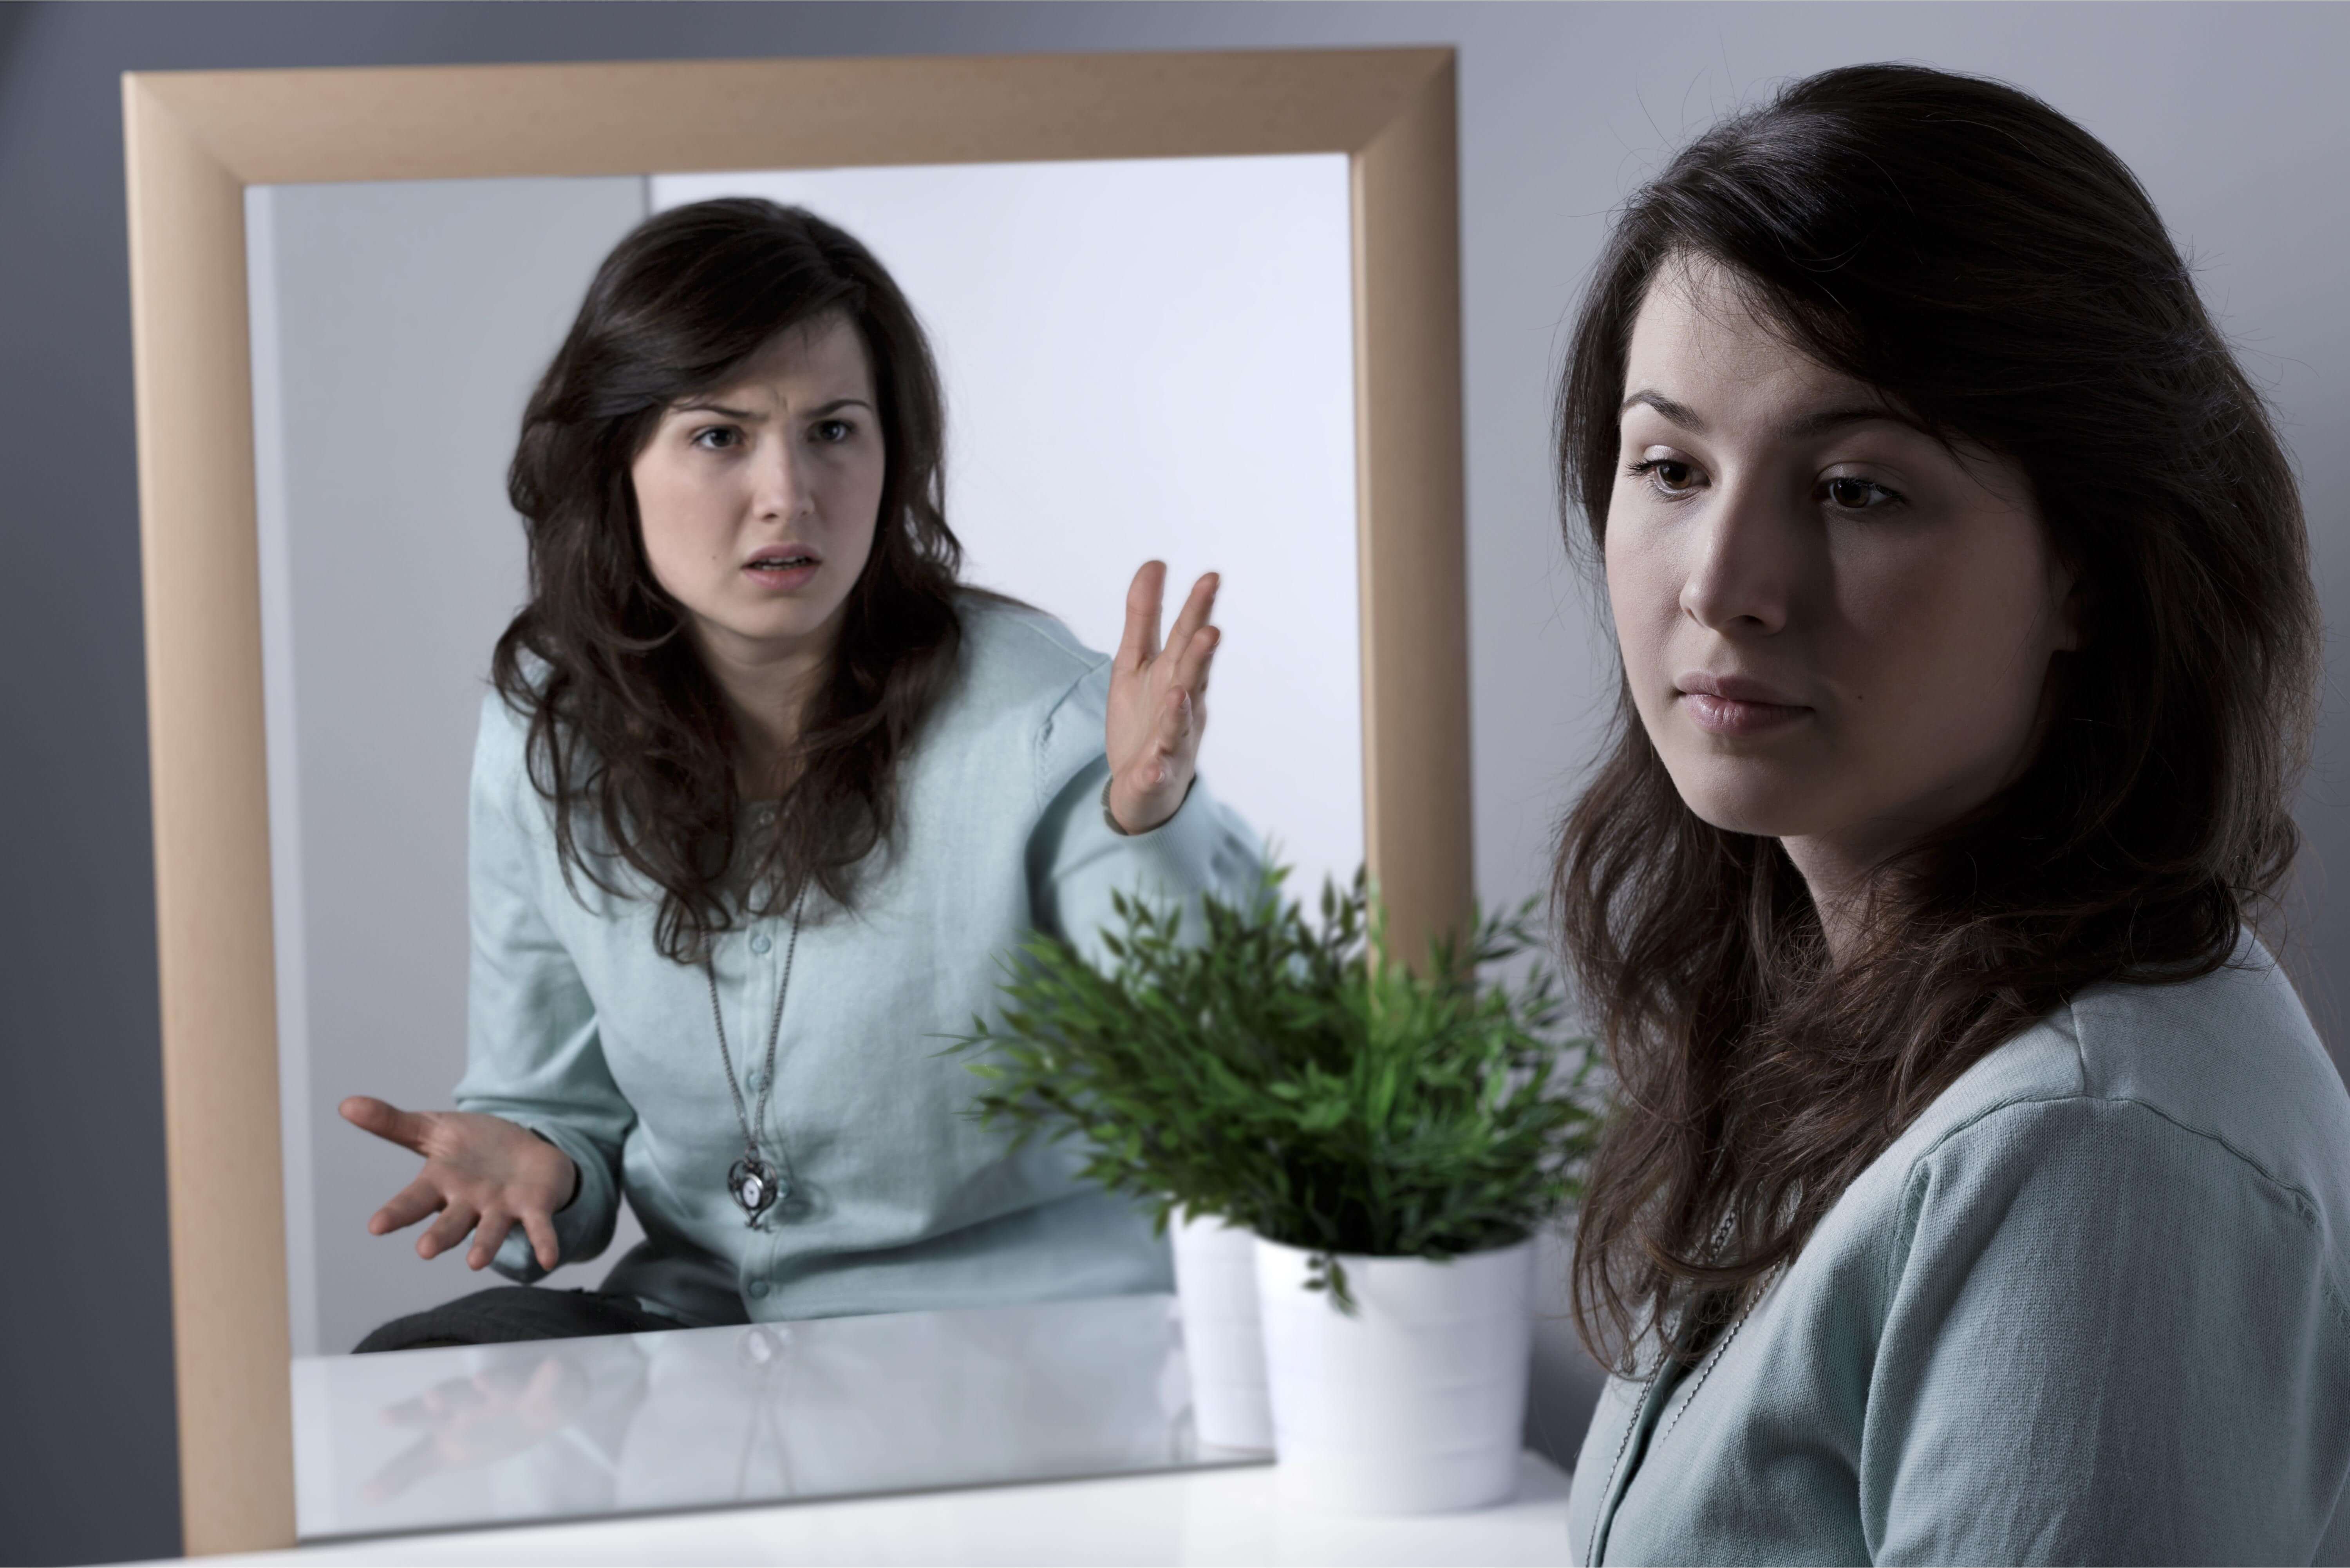 A person looking at their reflection that seems to be very critical, indicating signs of depression